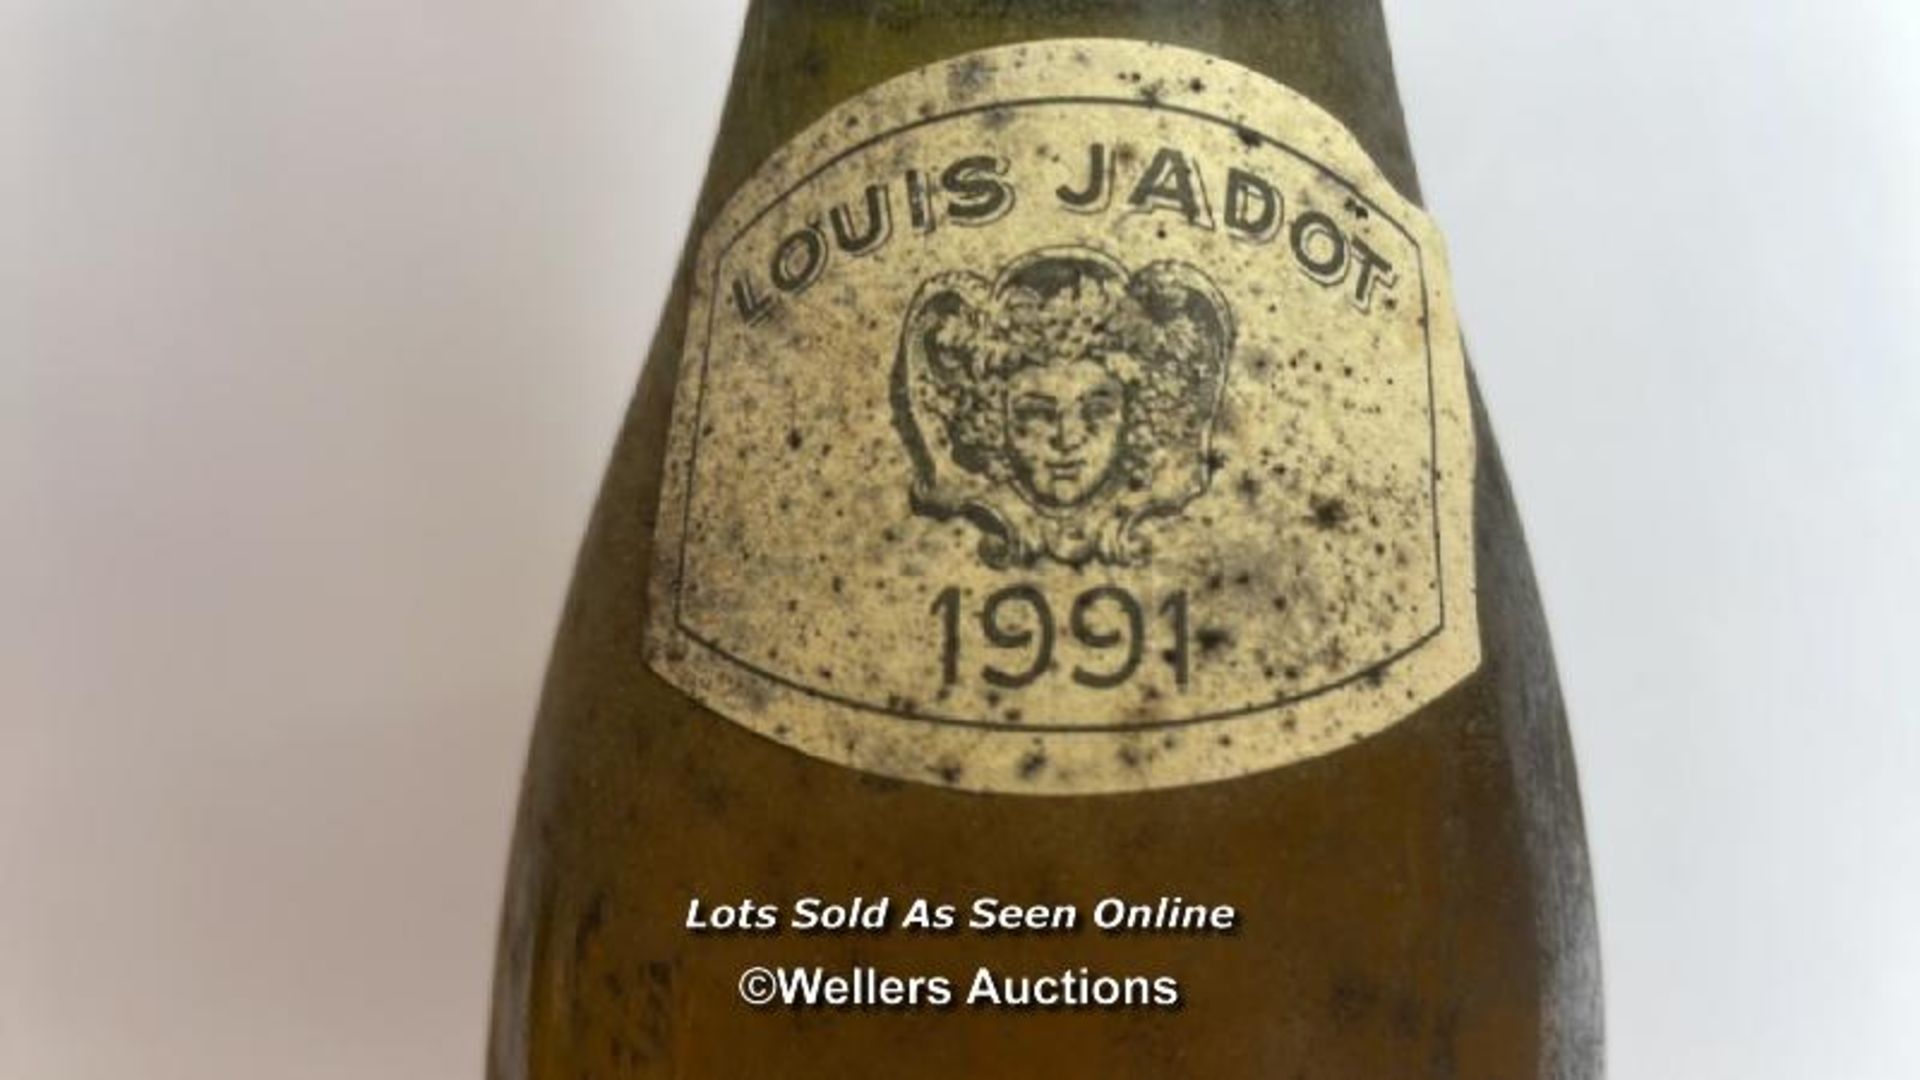 1991 Louis Jadot Saint-Aubin, 75cl, 13.5% vol / Please see images for fill level and general - Image 5 of 7